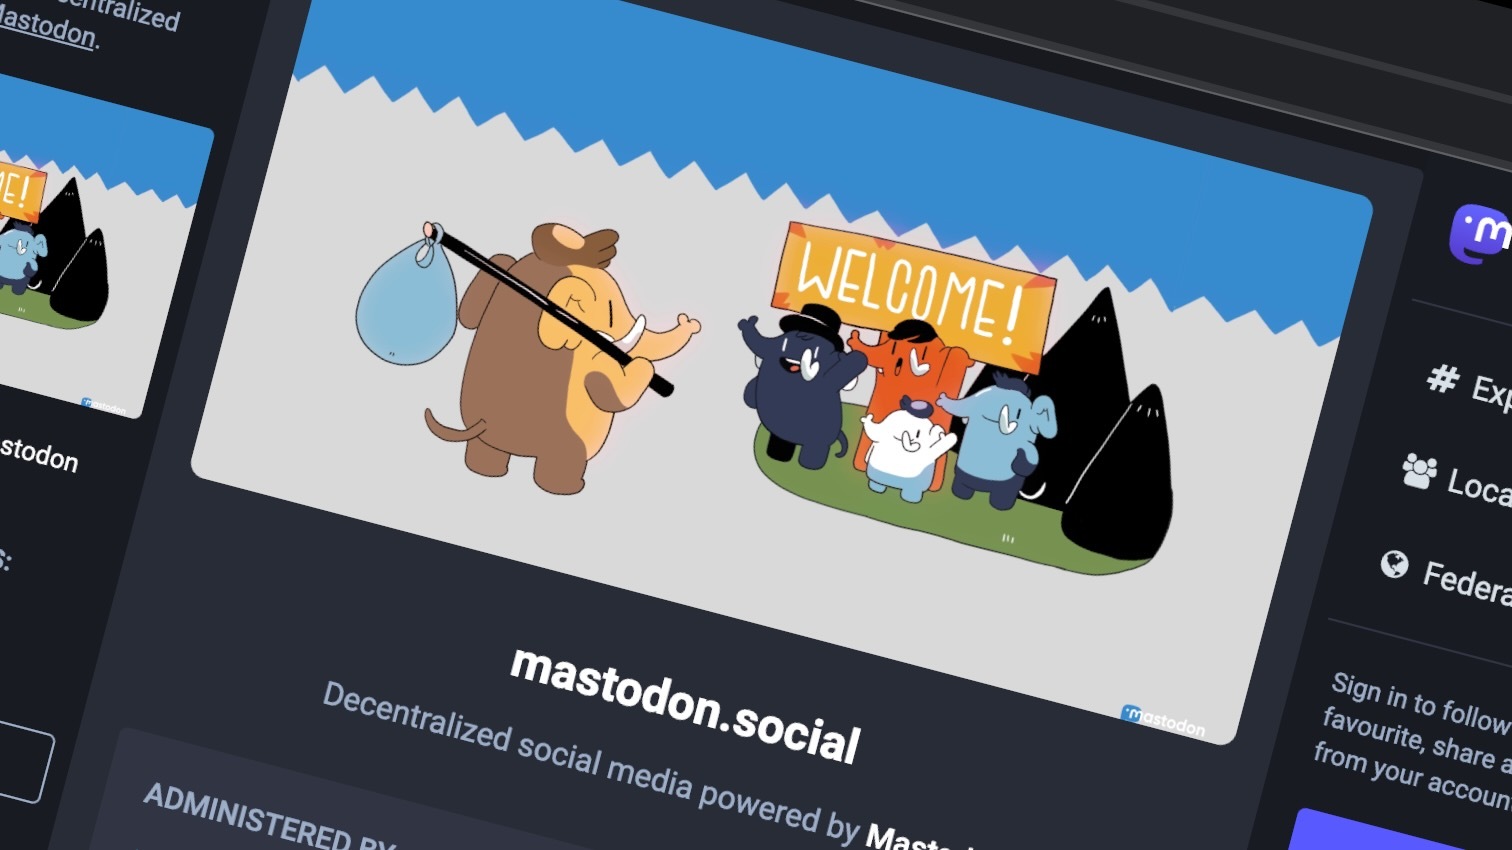 New Discovery: Mastodon Has Over 400K More Monthly Users Than Reported